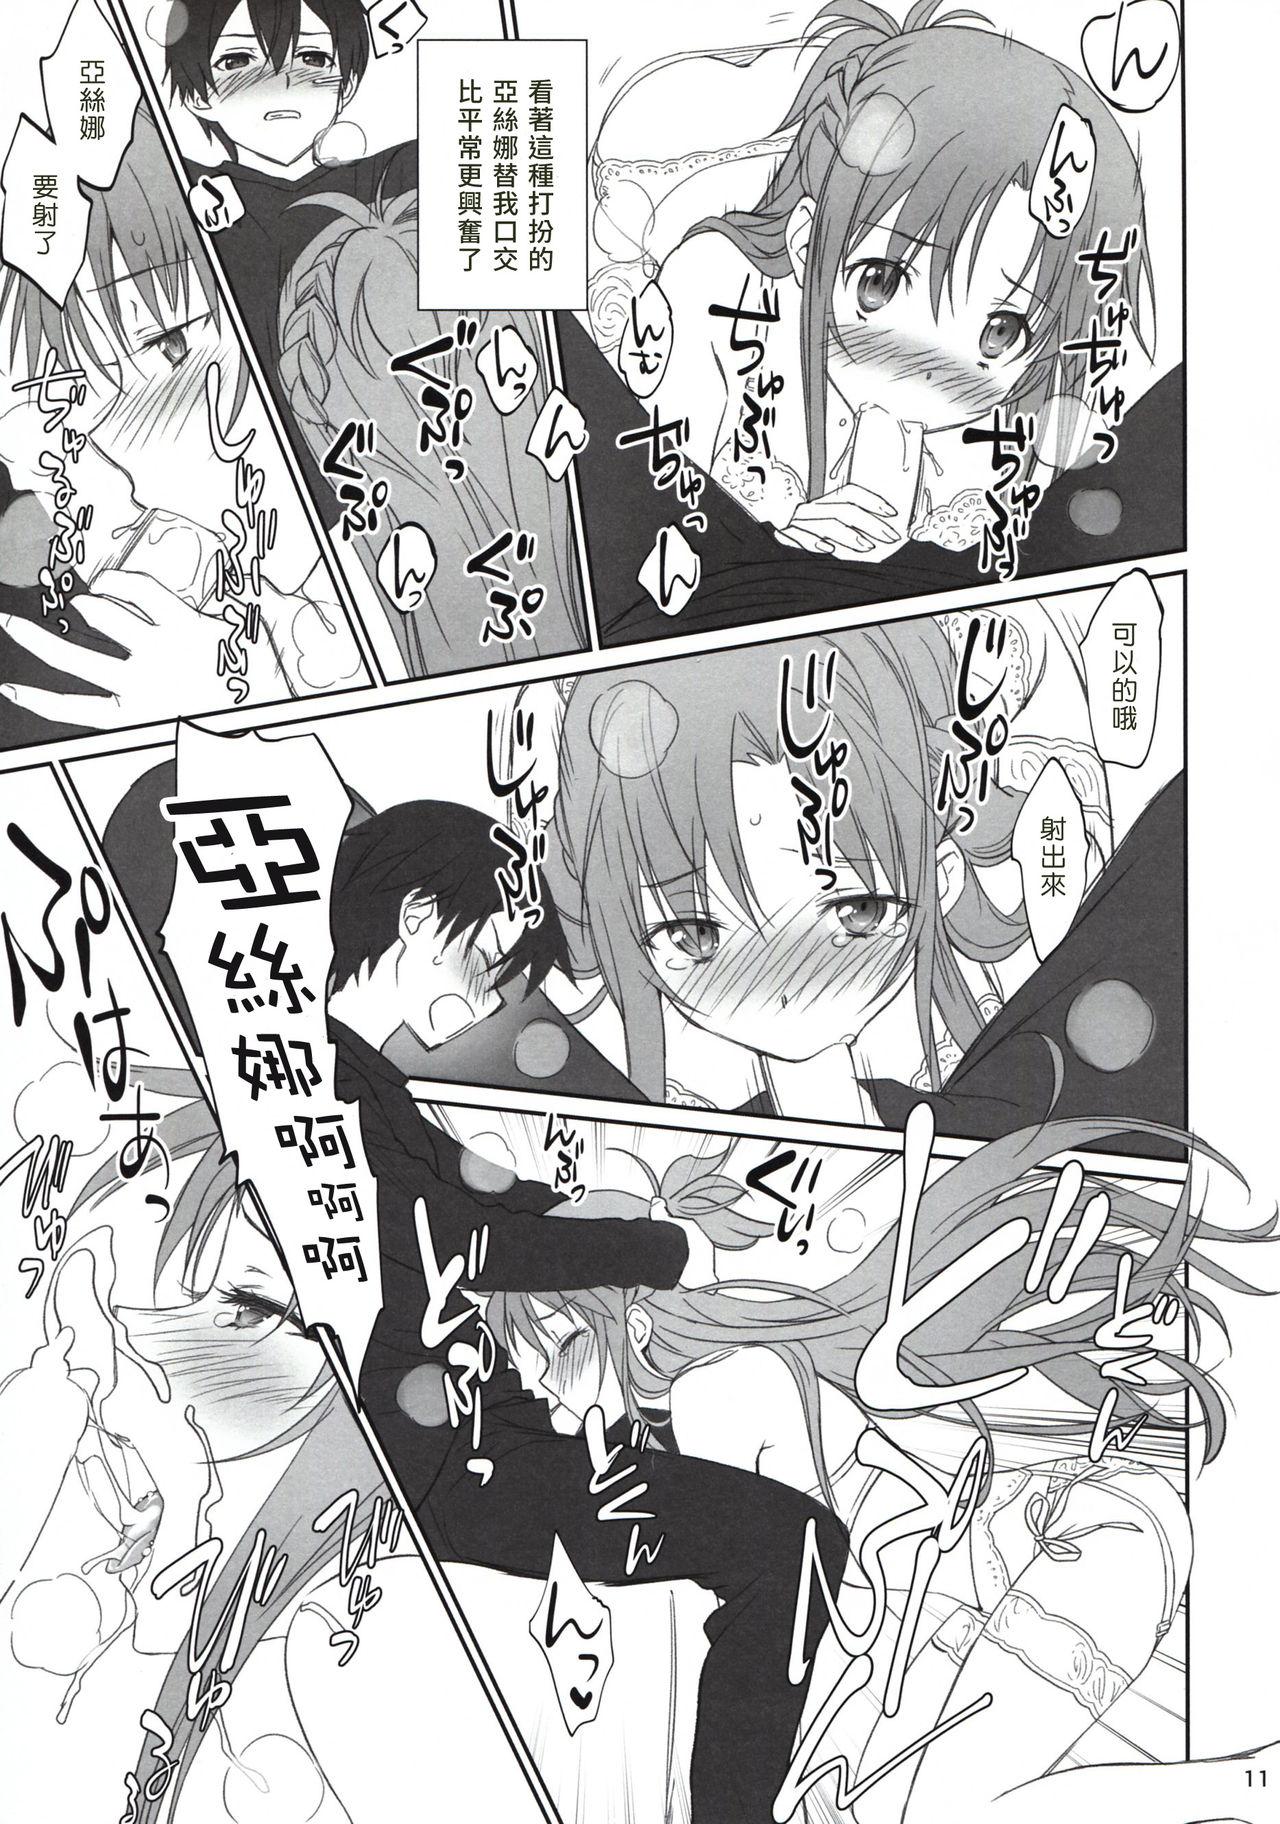 Blackmail Voyeuristic Disorder - Sword art online Stepfamily - Page 11